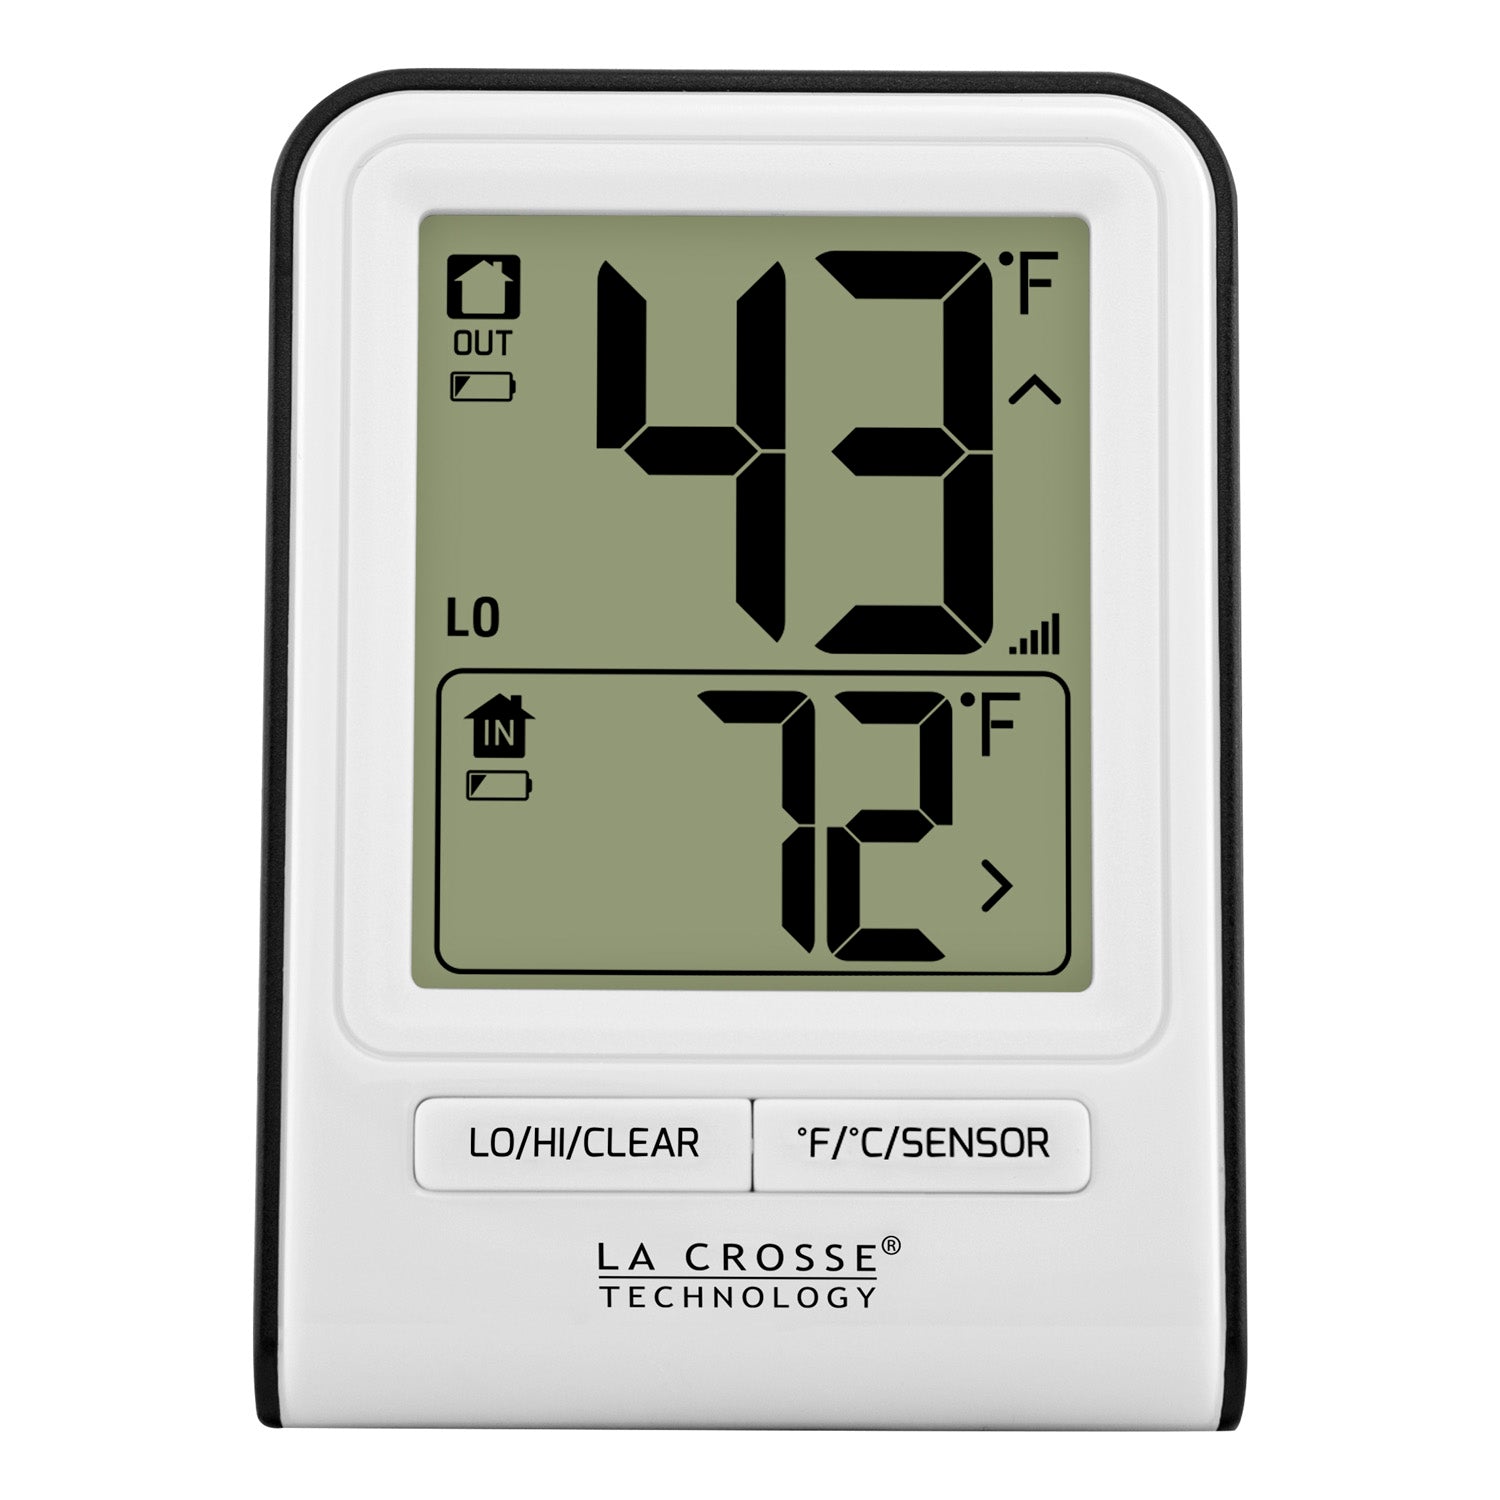  La Crosse Technology 30.1043.4 TFA Digital Indoor and Outdoor  Thermometer, Small, Green : Patio, Lawn & Garden